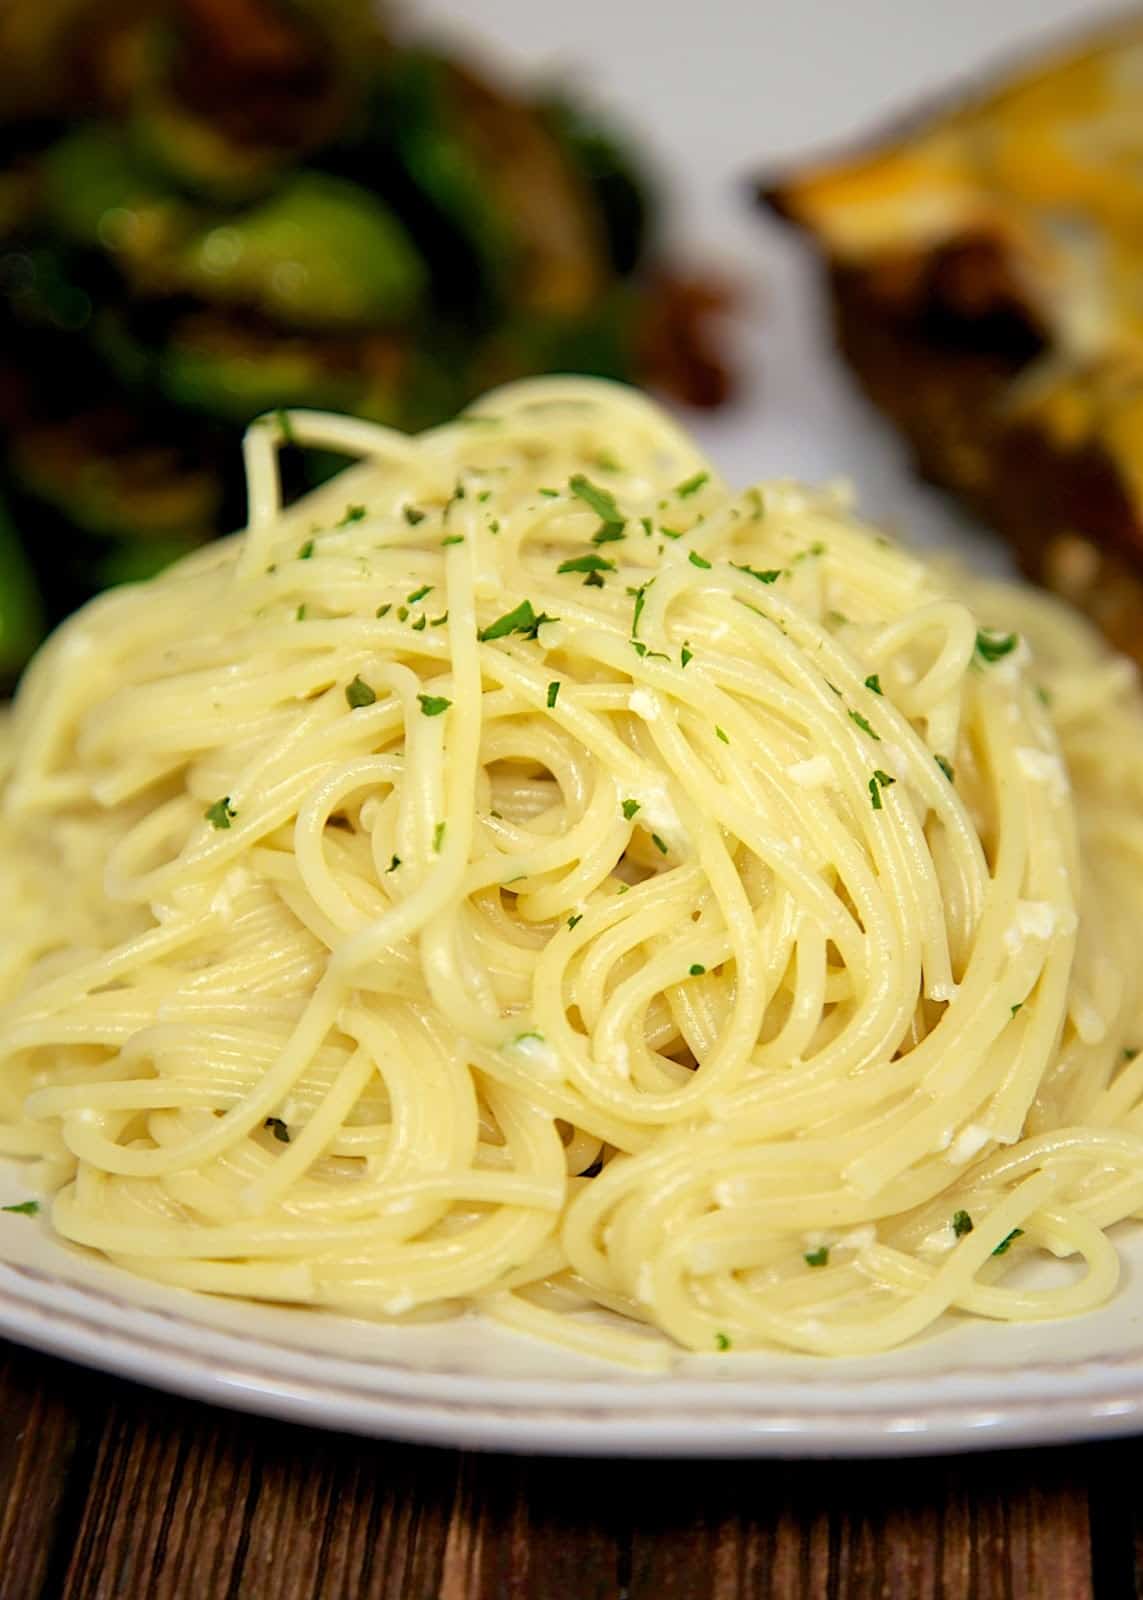 Lemon Vermicelli - quick side dish with only 5 ingredients! Pasta, heavy cream, butter, lemon juice and Parmesan - so delicious! I could make a meal out of this pasta!